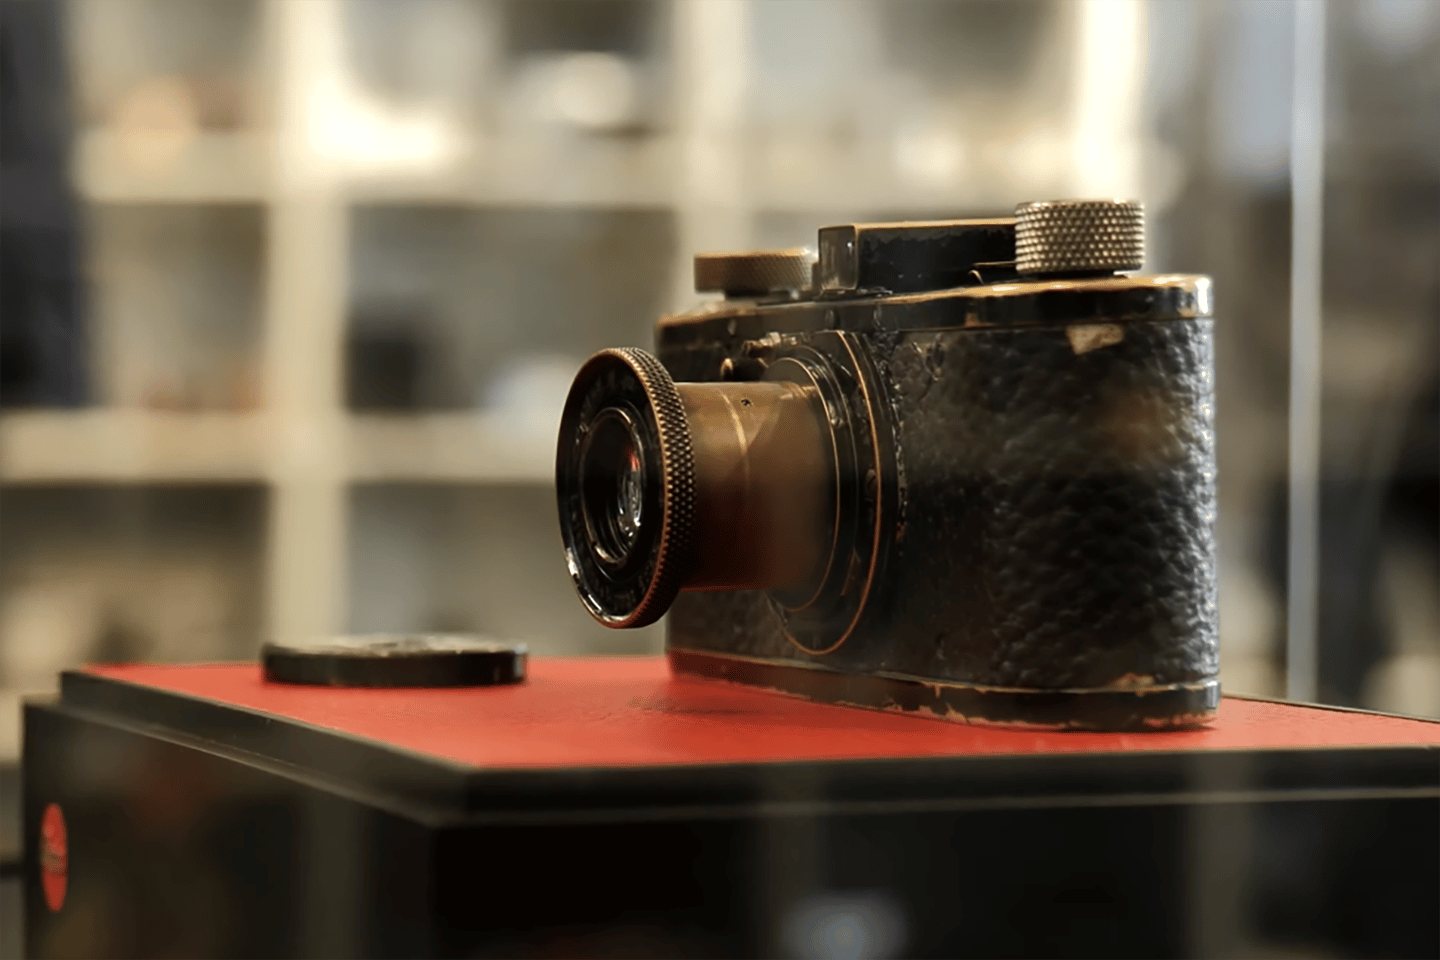 The world record price for a camera passed the $1 million dollar mark in 2011, the $2 million mark in 2012, and went close to cracking the $3 million milestone in 2018. In 2022, this camera raised the bar past $15 million - an astonishing result